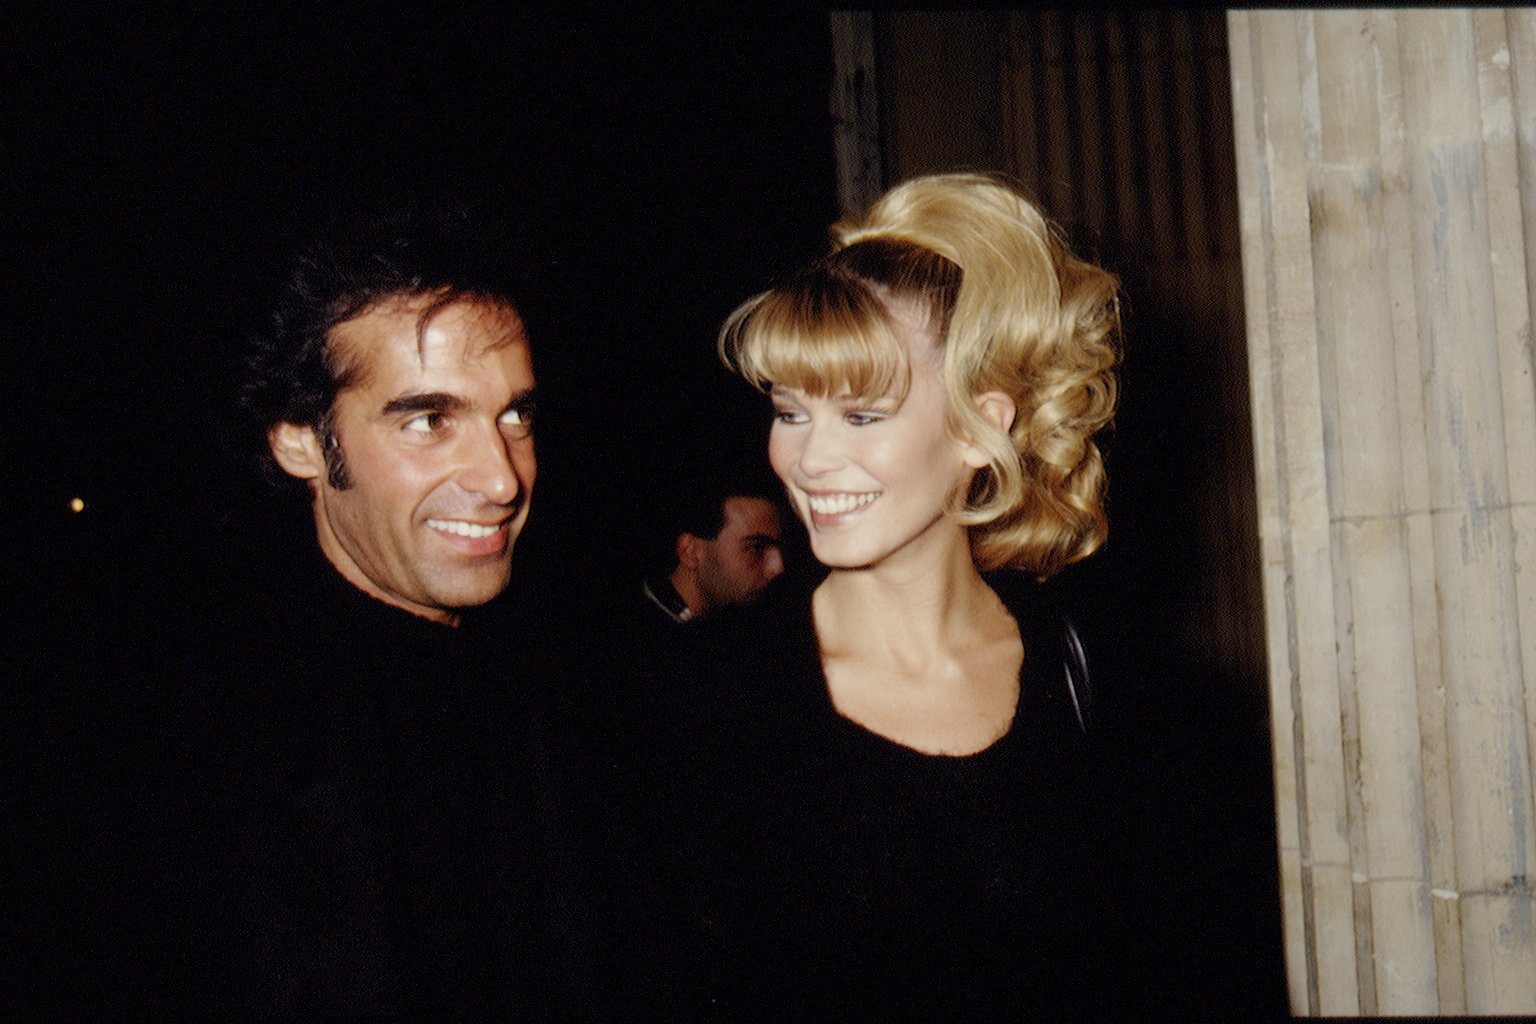 C. SCHIFFER AND D. COPPERFIELD AT FASHION SHOW